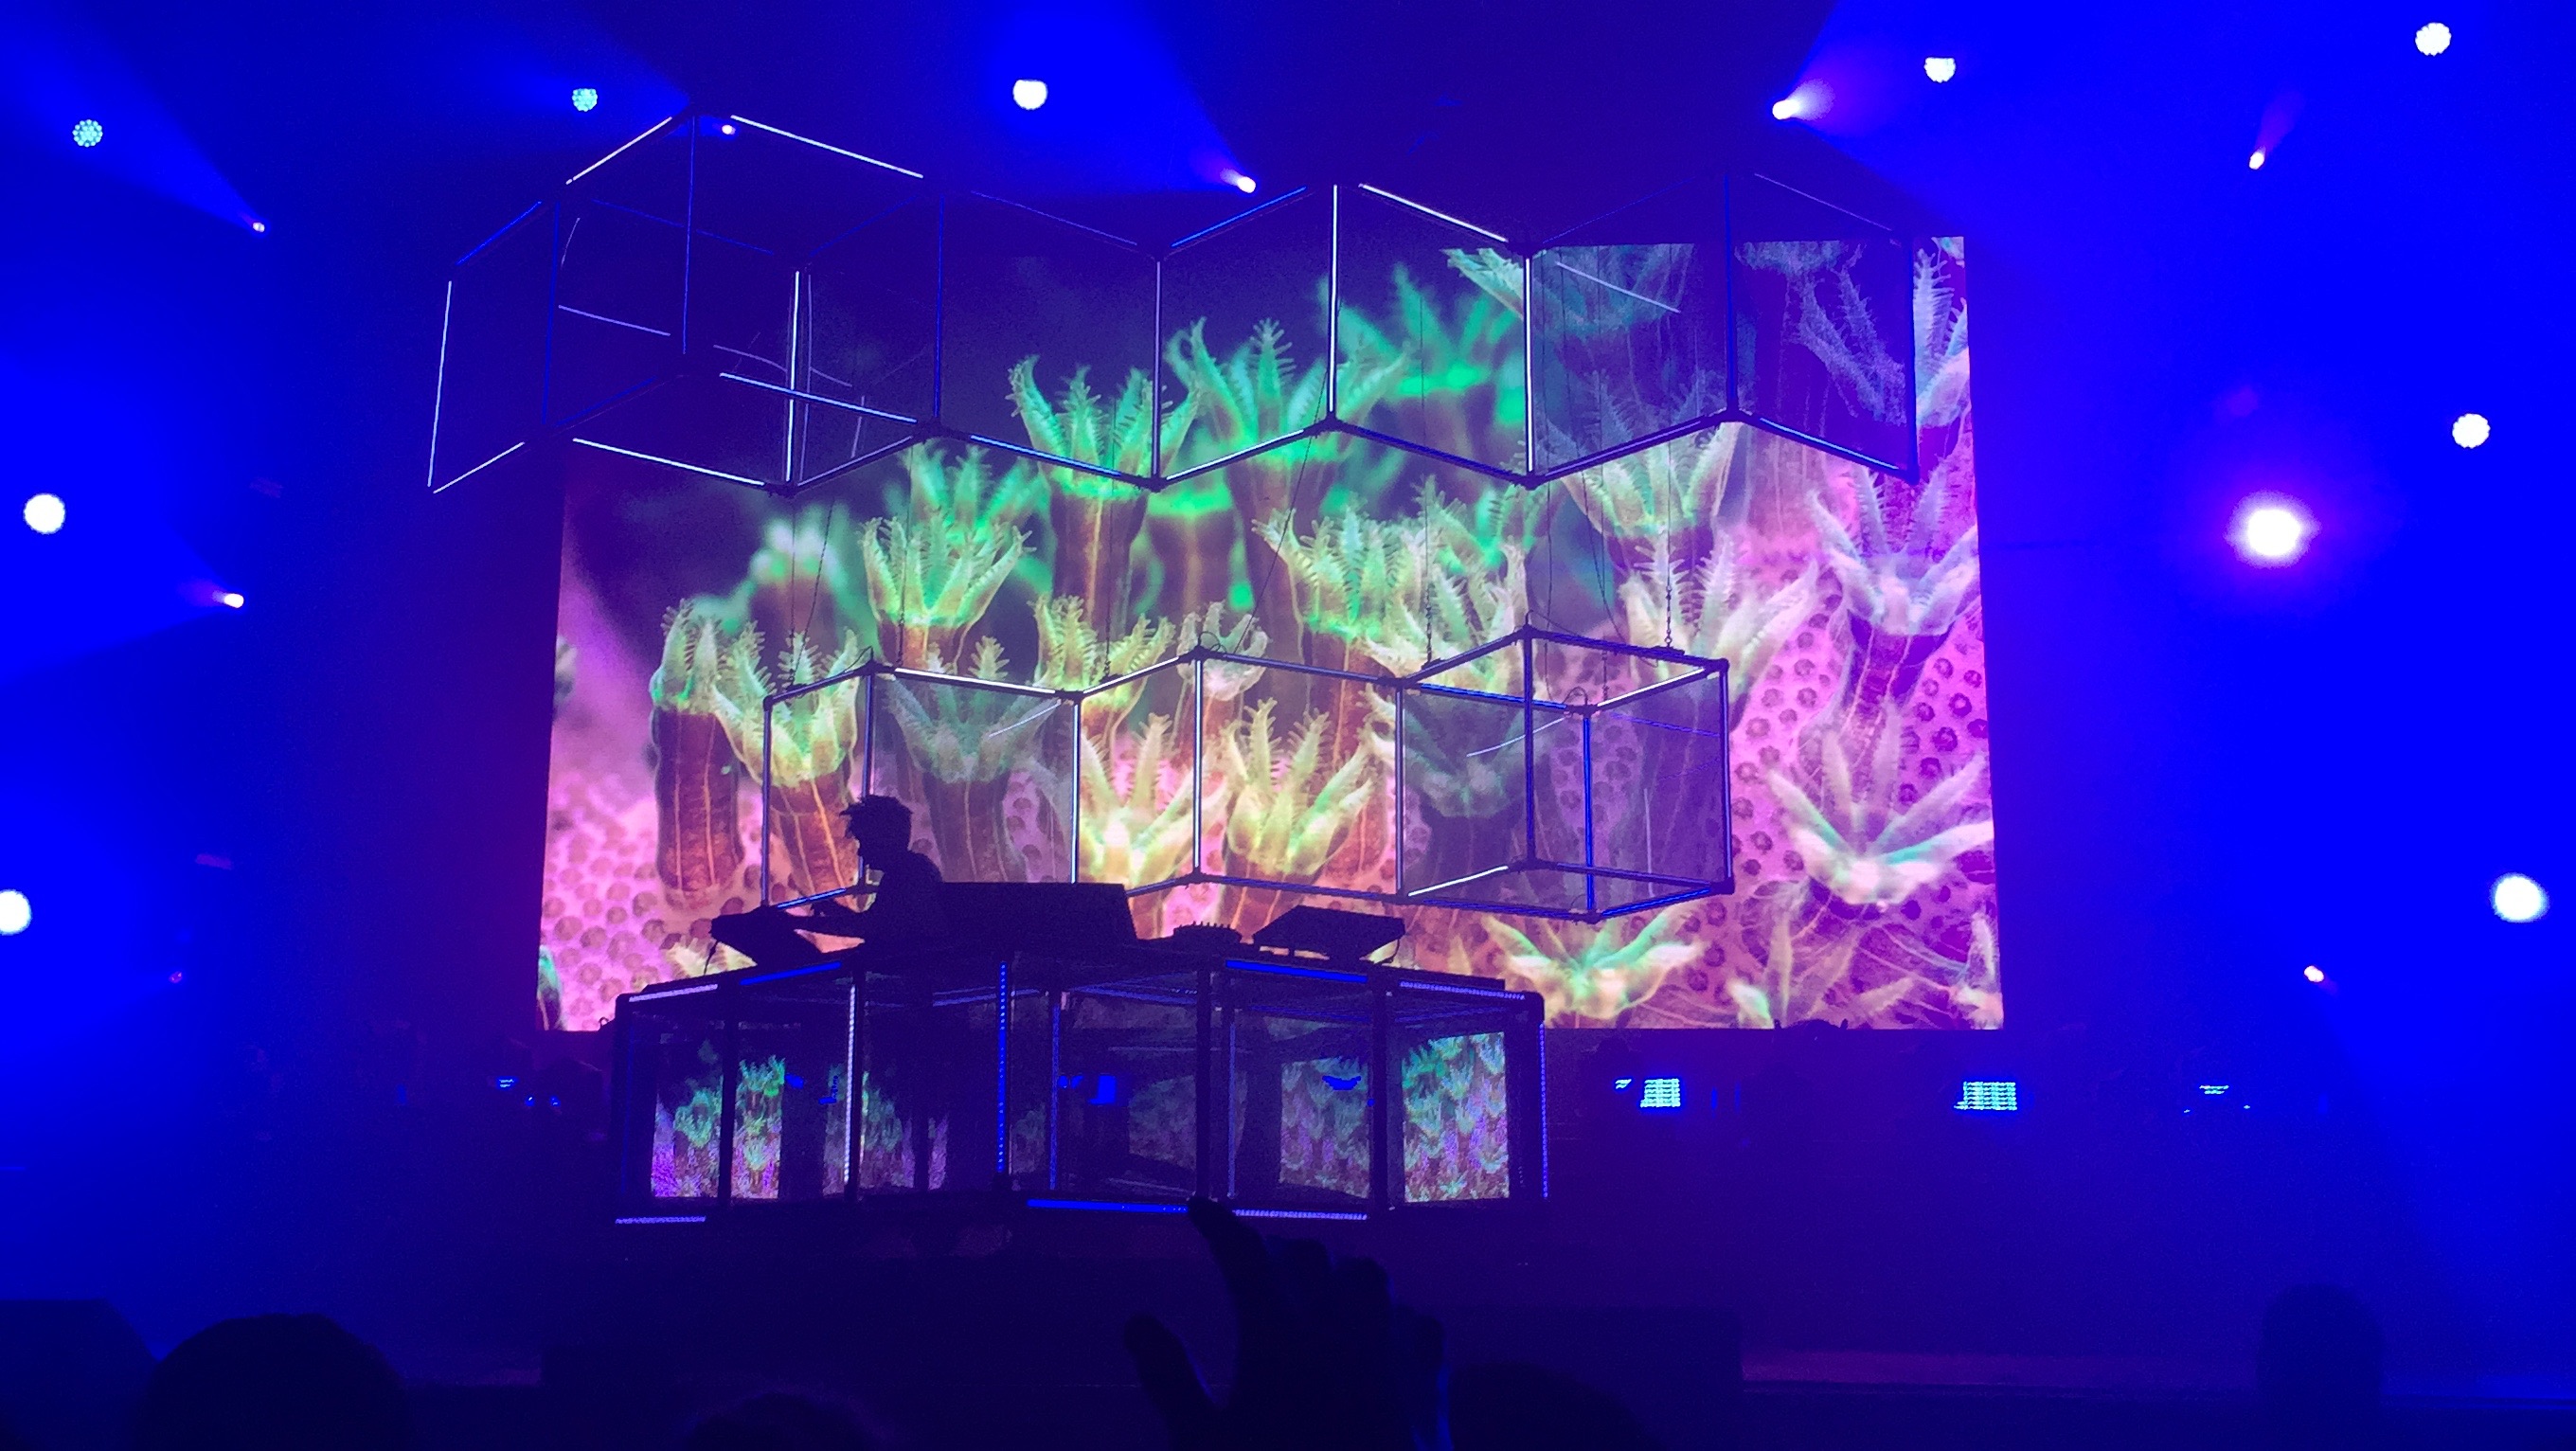 Flume at Shrine Auditorium 8/12/16. Photo by Kwanza Gooden. Licensed by www.BlurredCulture.com.